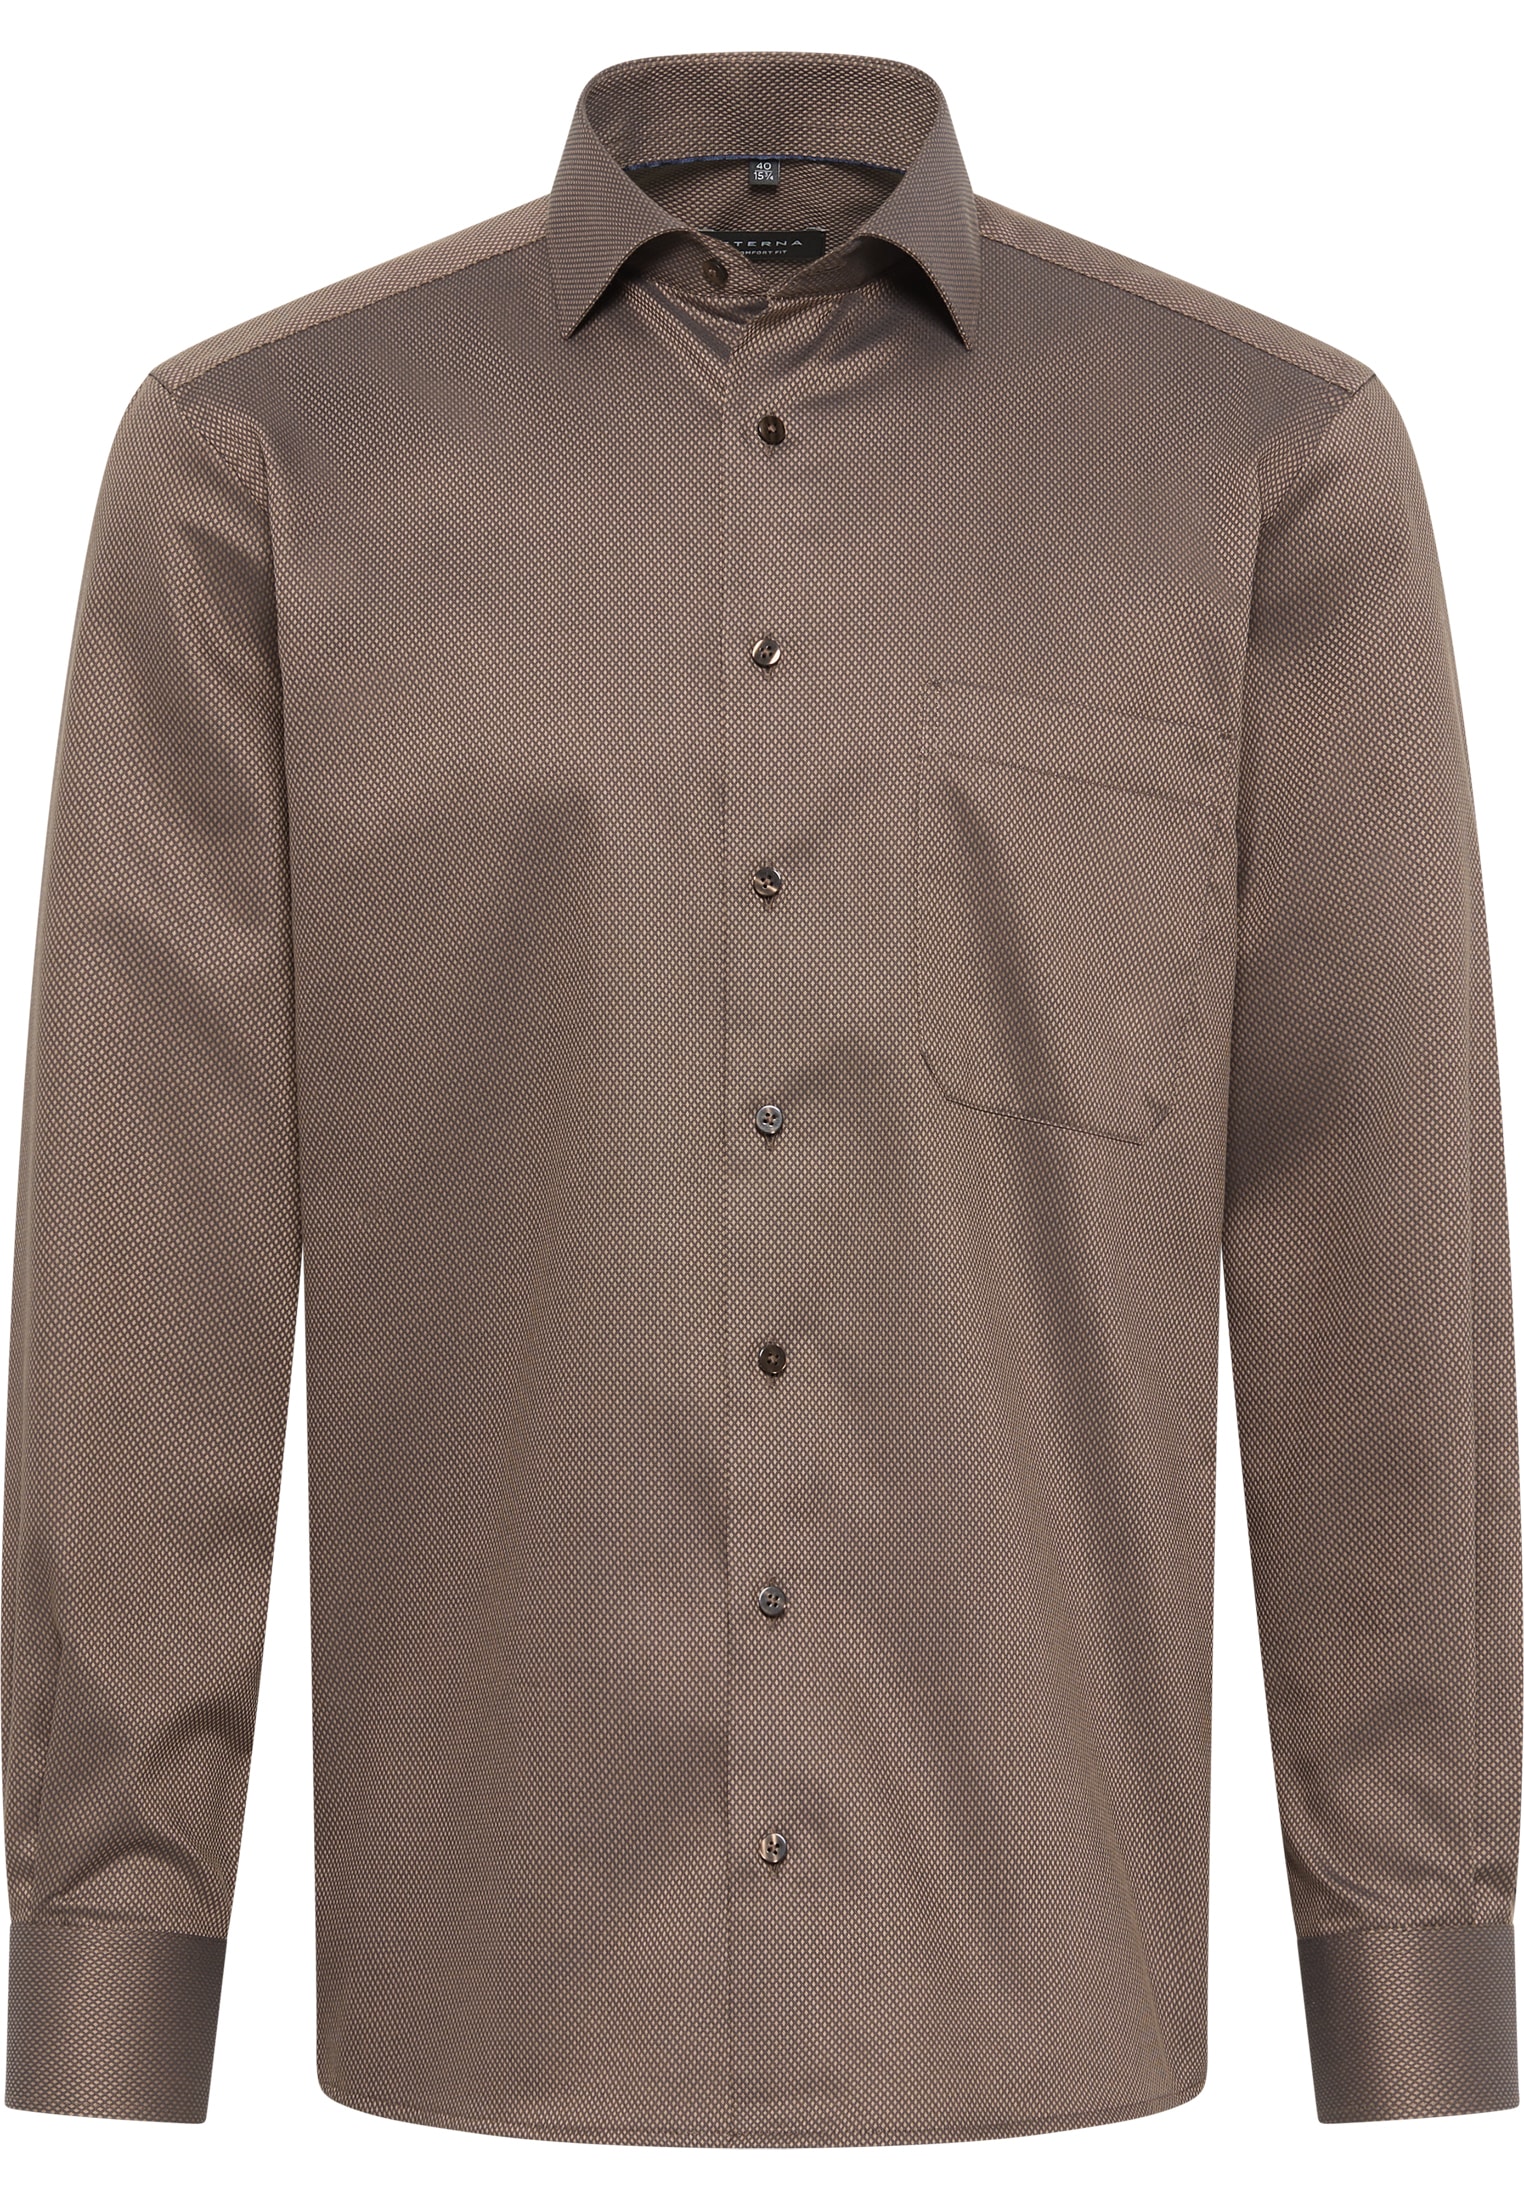 COMFORT FIT Shirt in taupe structured